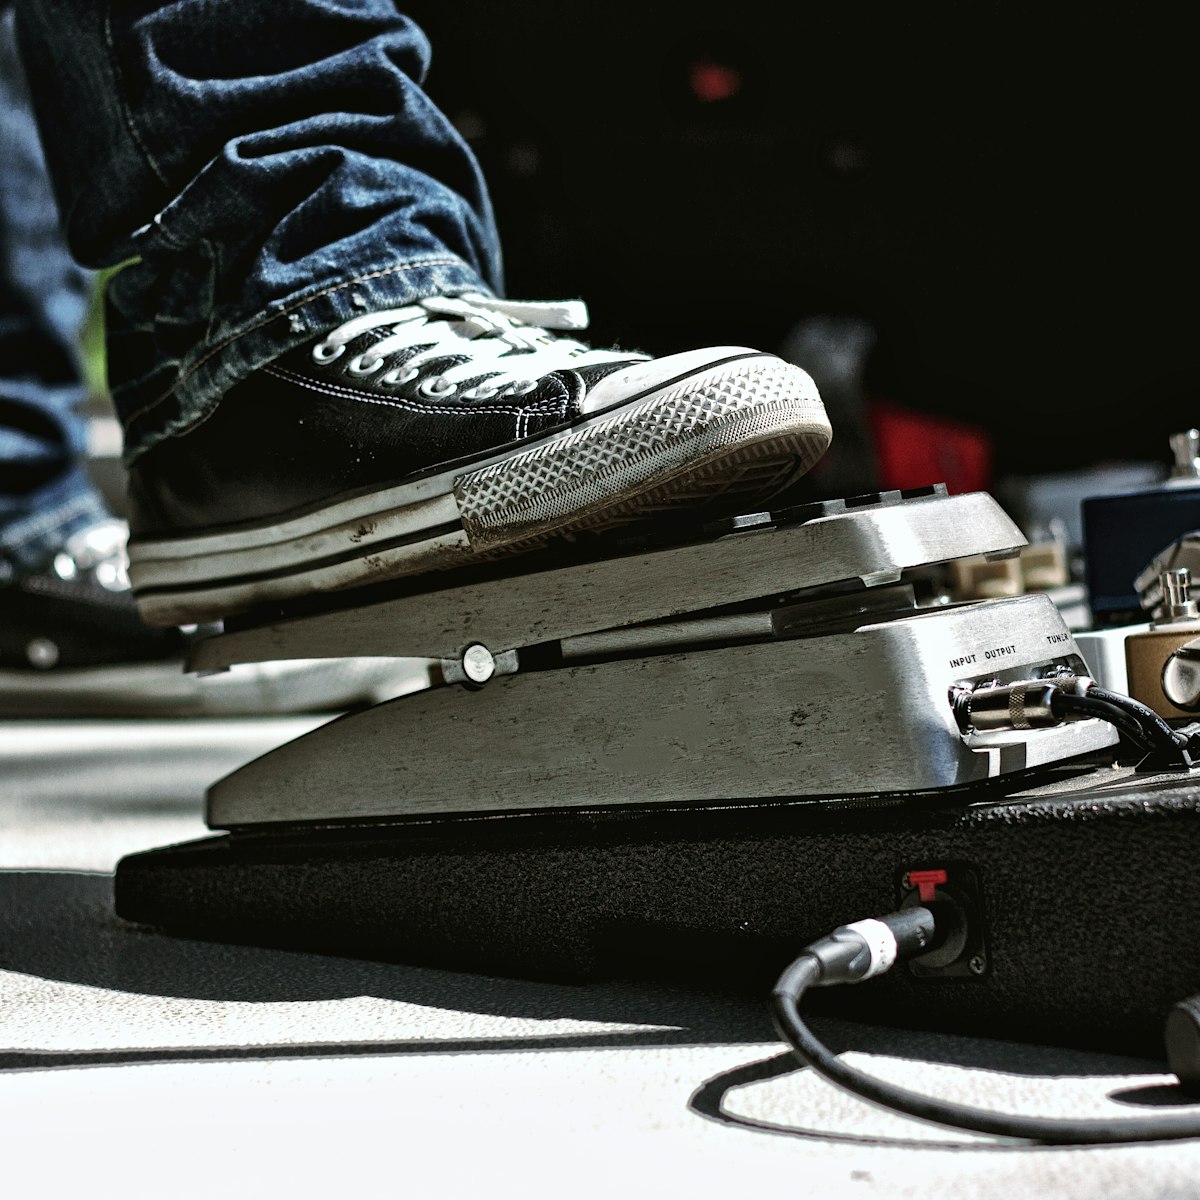 Guitarist with skinny jeans, on outdoor stage playing live music standing with his pedalboard full of stomboxes and guitar pedals at a concert.